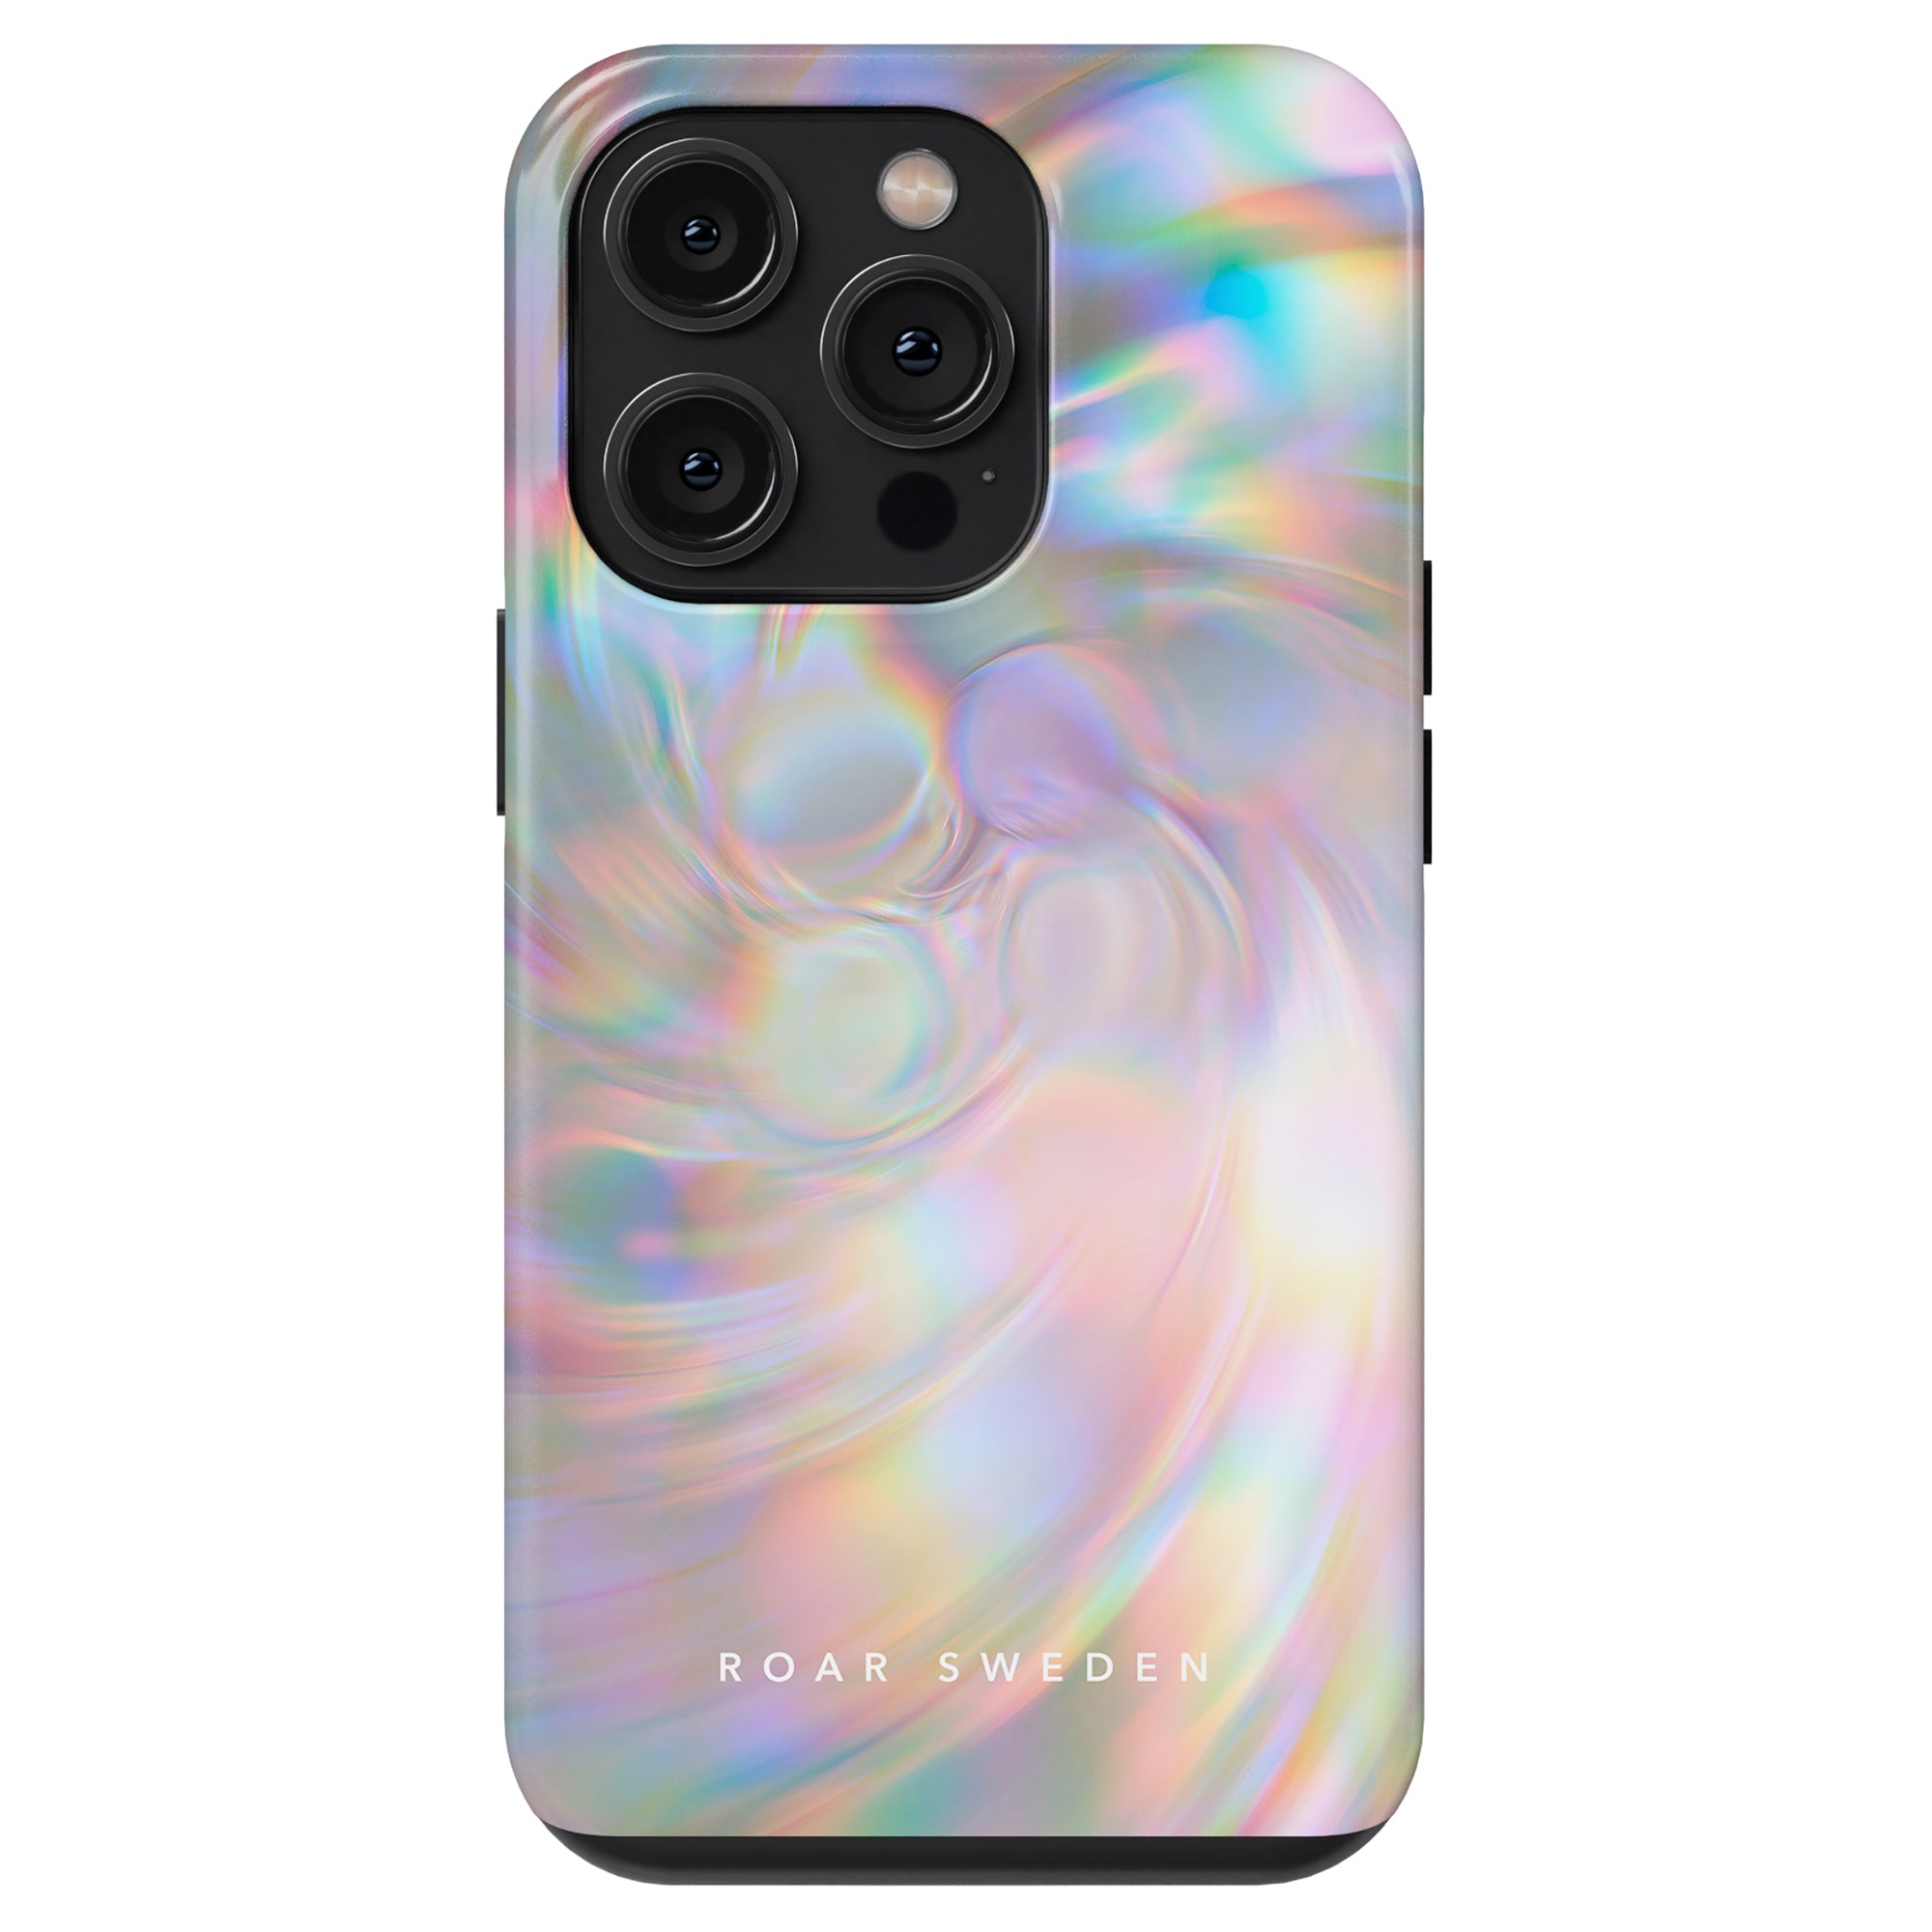 A smartphone with a swirl-patterned Pearlescent - Tough Case from roar sweden, featuring a triple-lens camera setup.